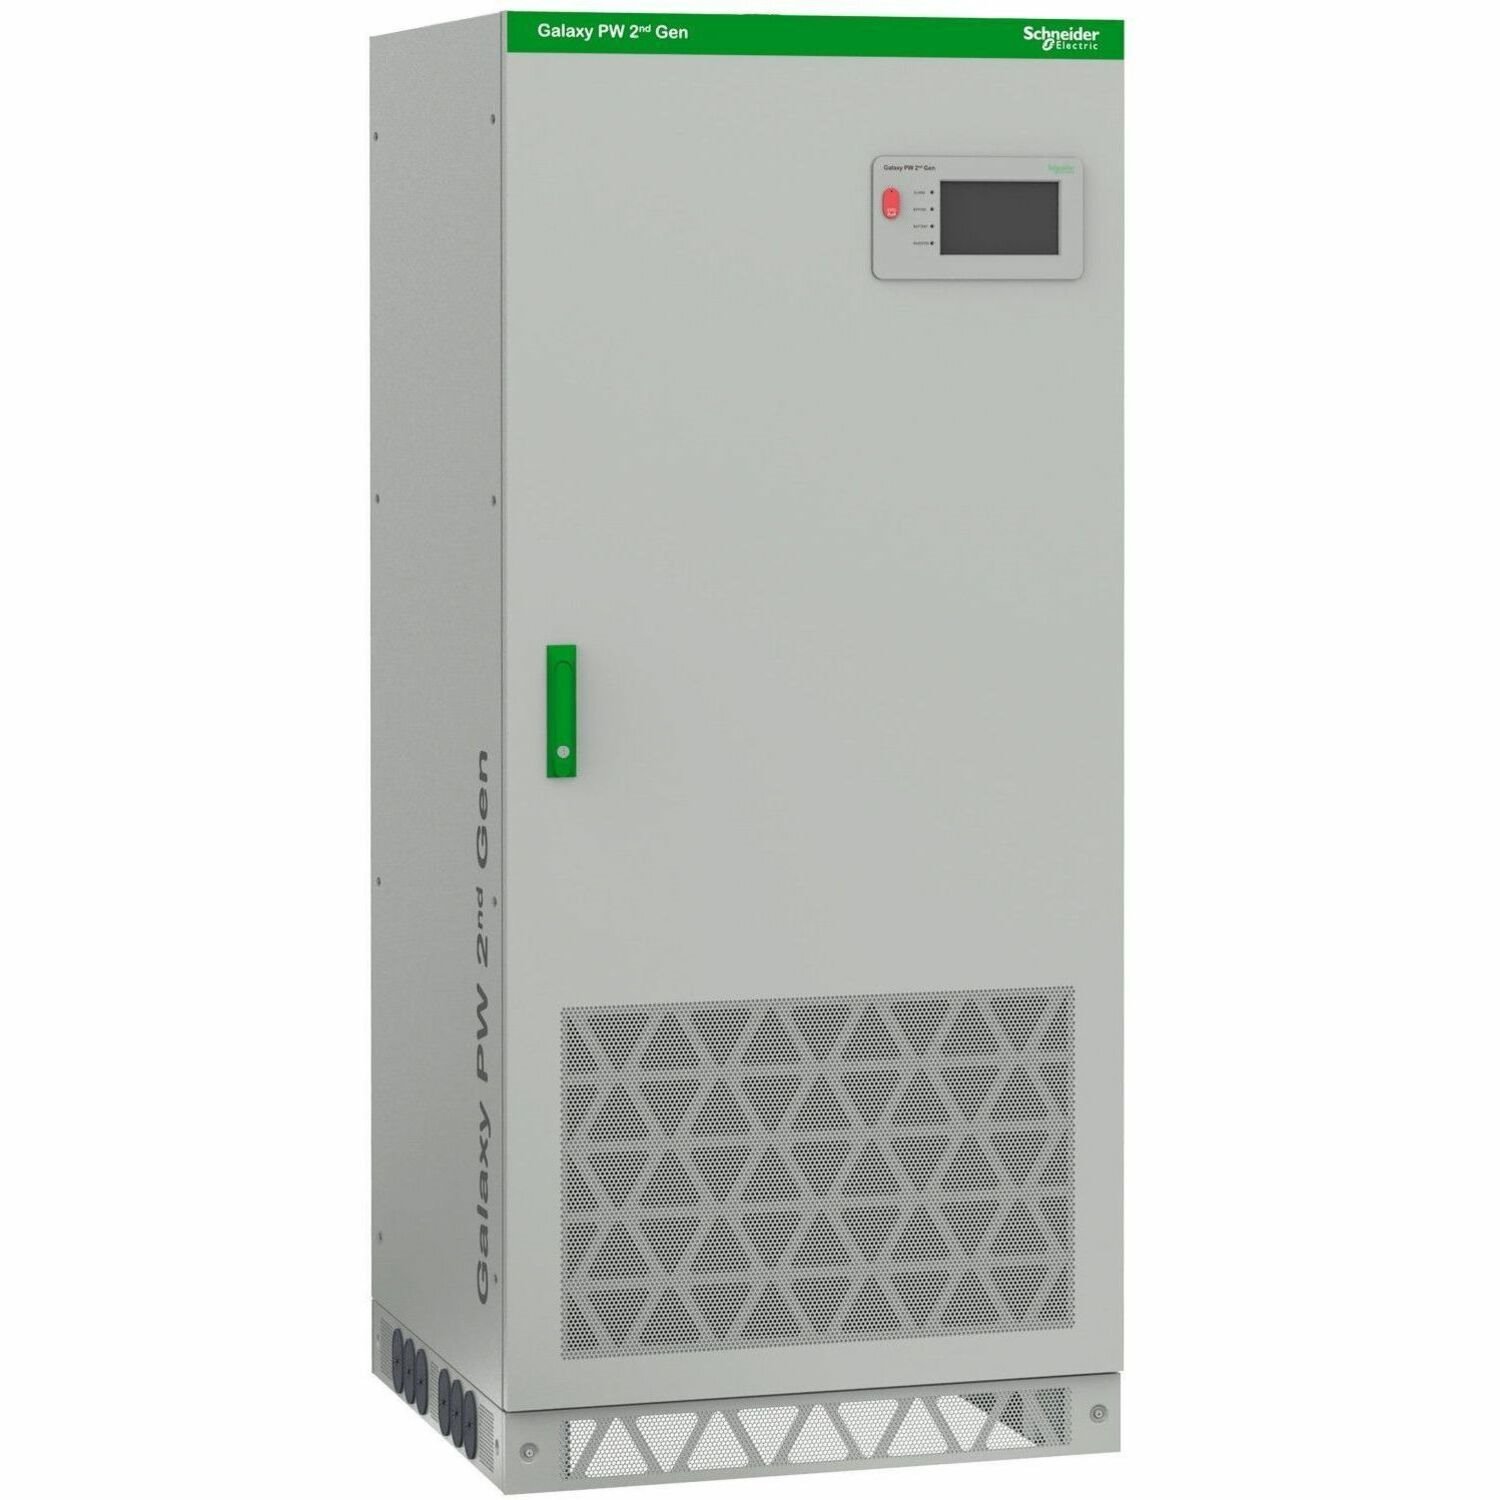 APC by Schneider Electric Galaxy PW 2nd Gen Double Conversion Online UPS - 40 kVA/32 kW - Three Phase